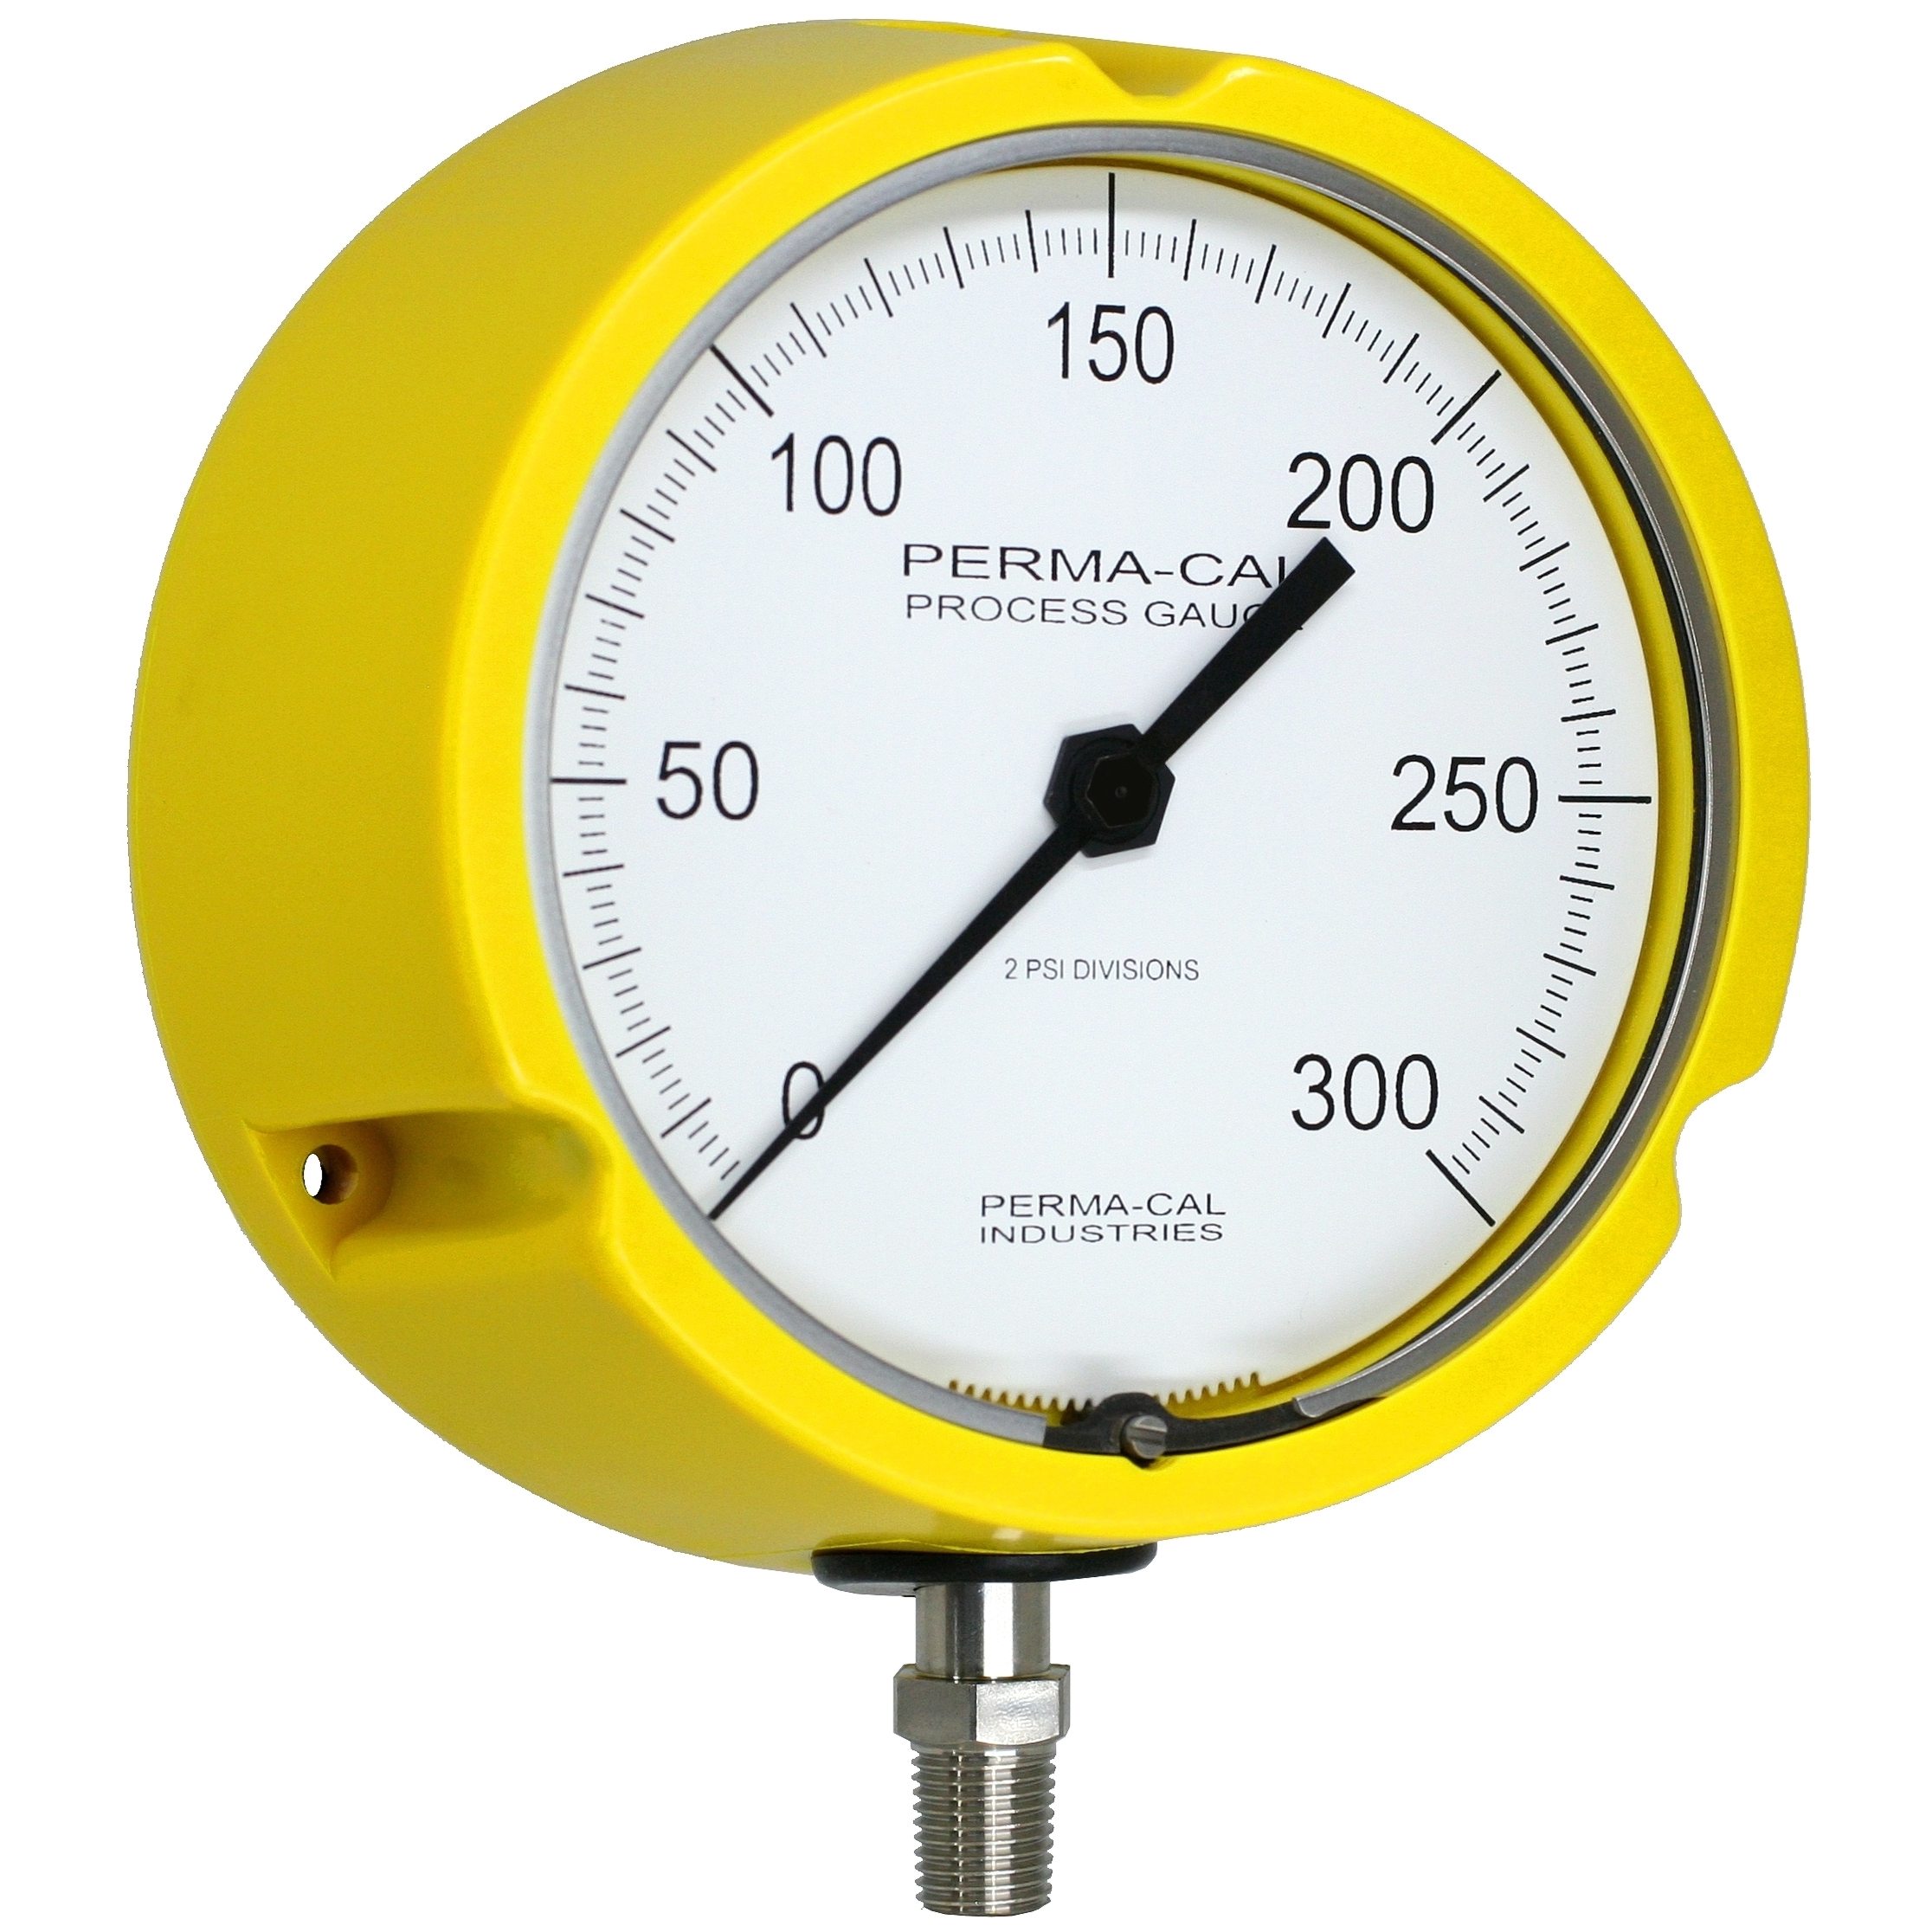 10 PSI Divisions 0-1500 Psi Details about   Perma-Cal Process Gauge 121TID12Y23 Yellow 